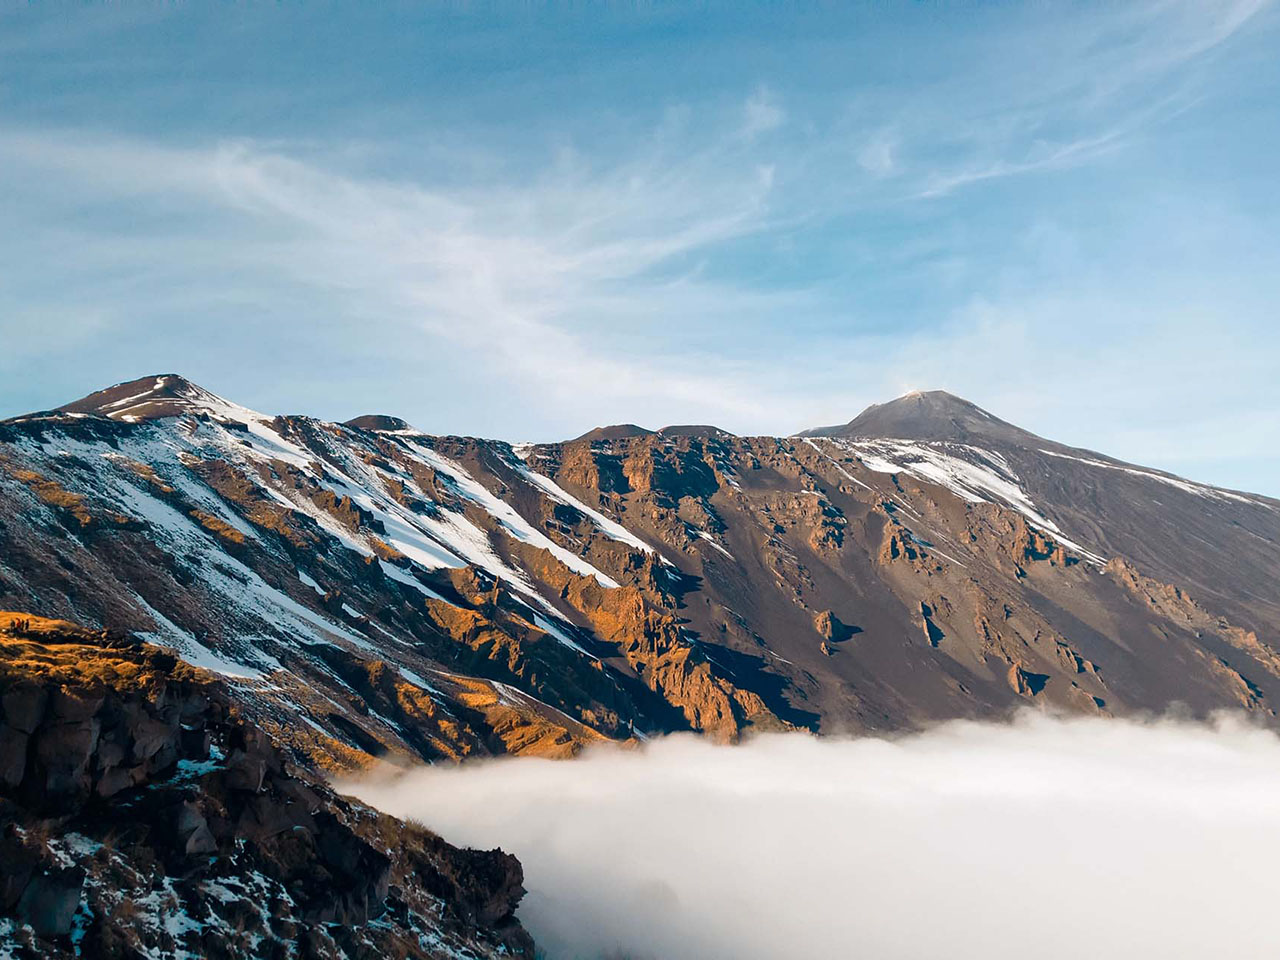 peaks of the Etna volcano, with snow and clouds